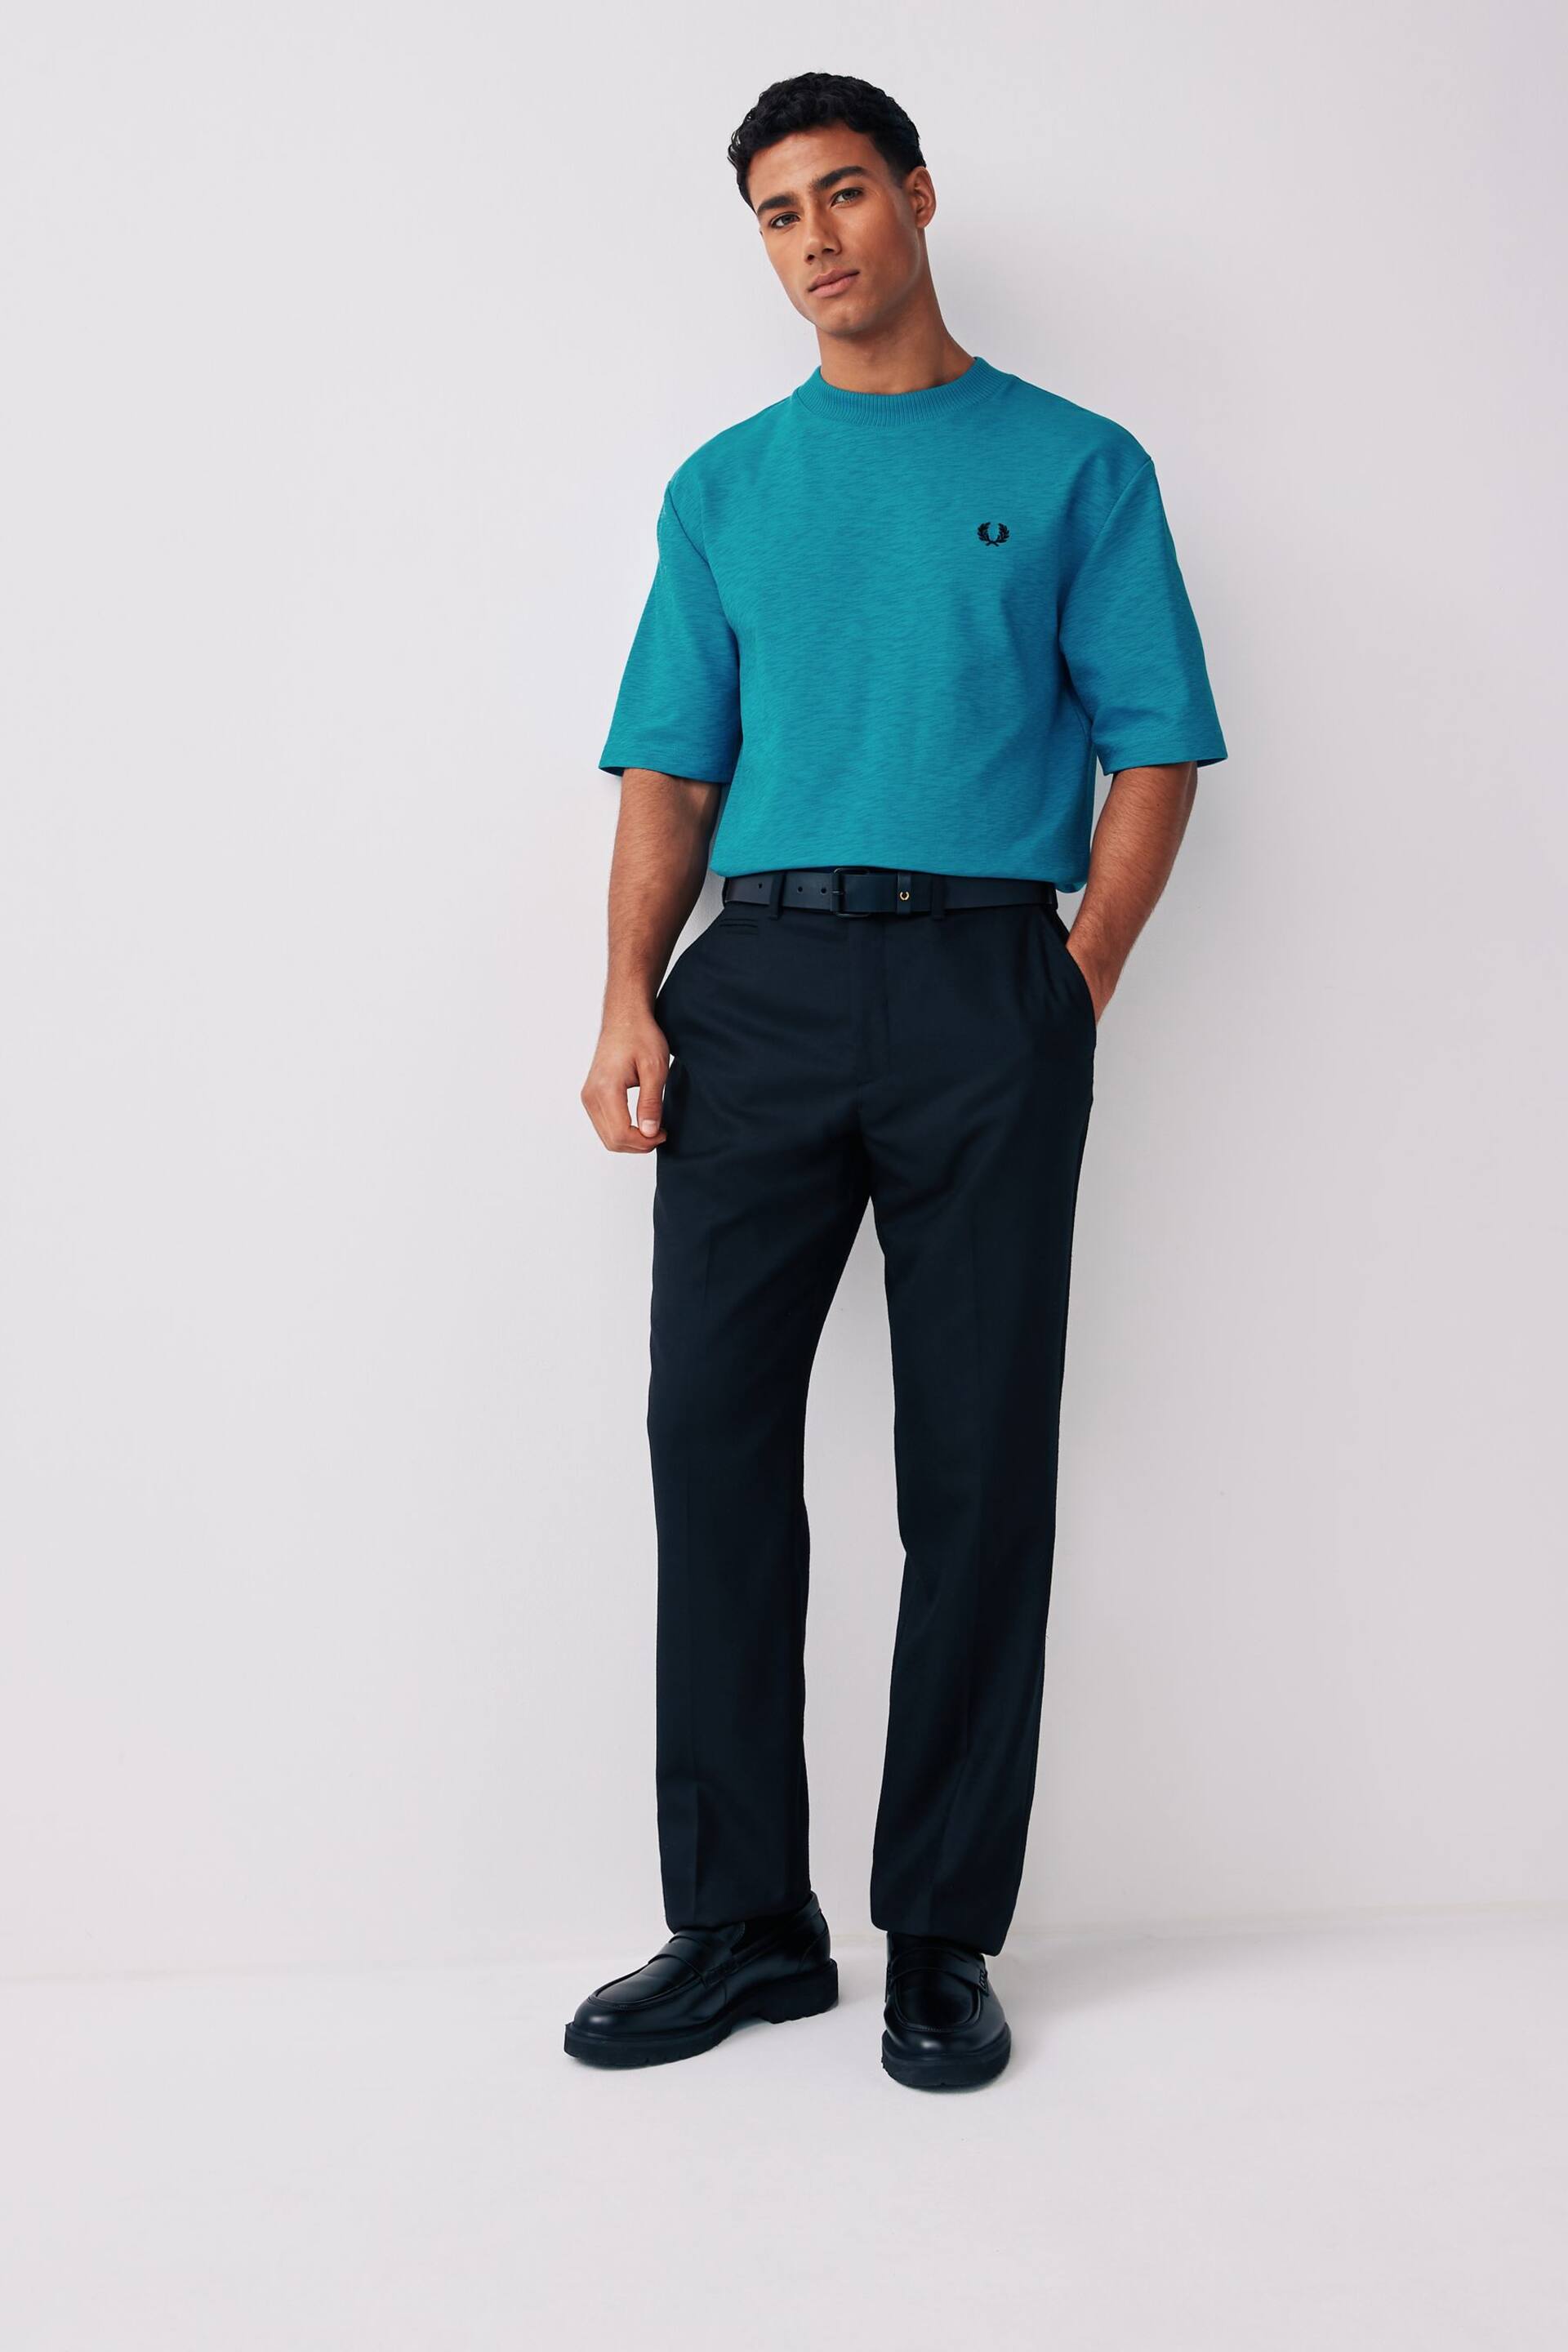 Fred Perry Relaxed Fit Slub Textured T-Shirt - Image 2 of 4